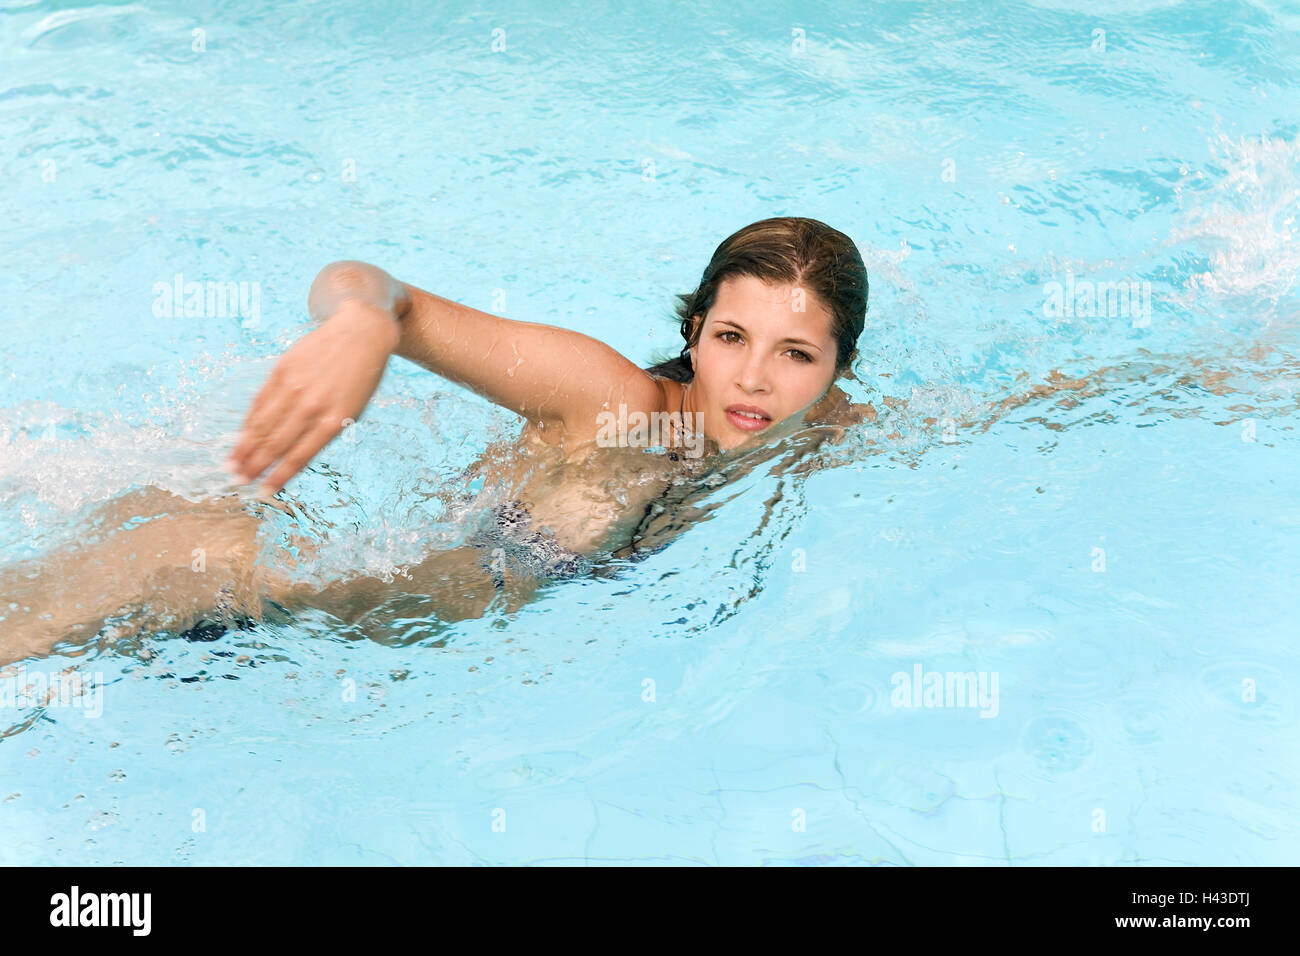 Woman, young, brunette, pool, swim, model released, Stock Photo